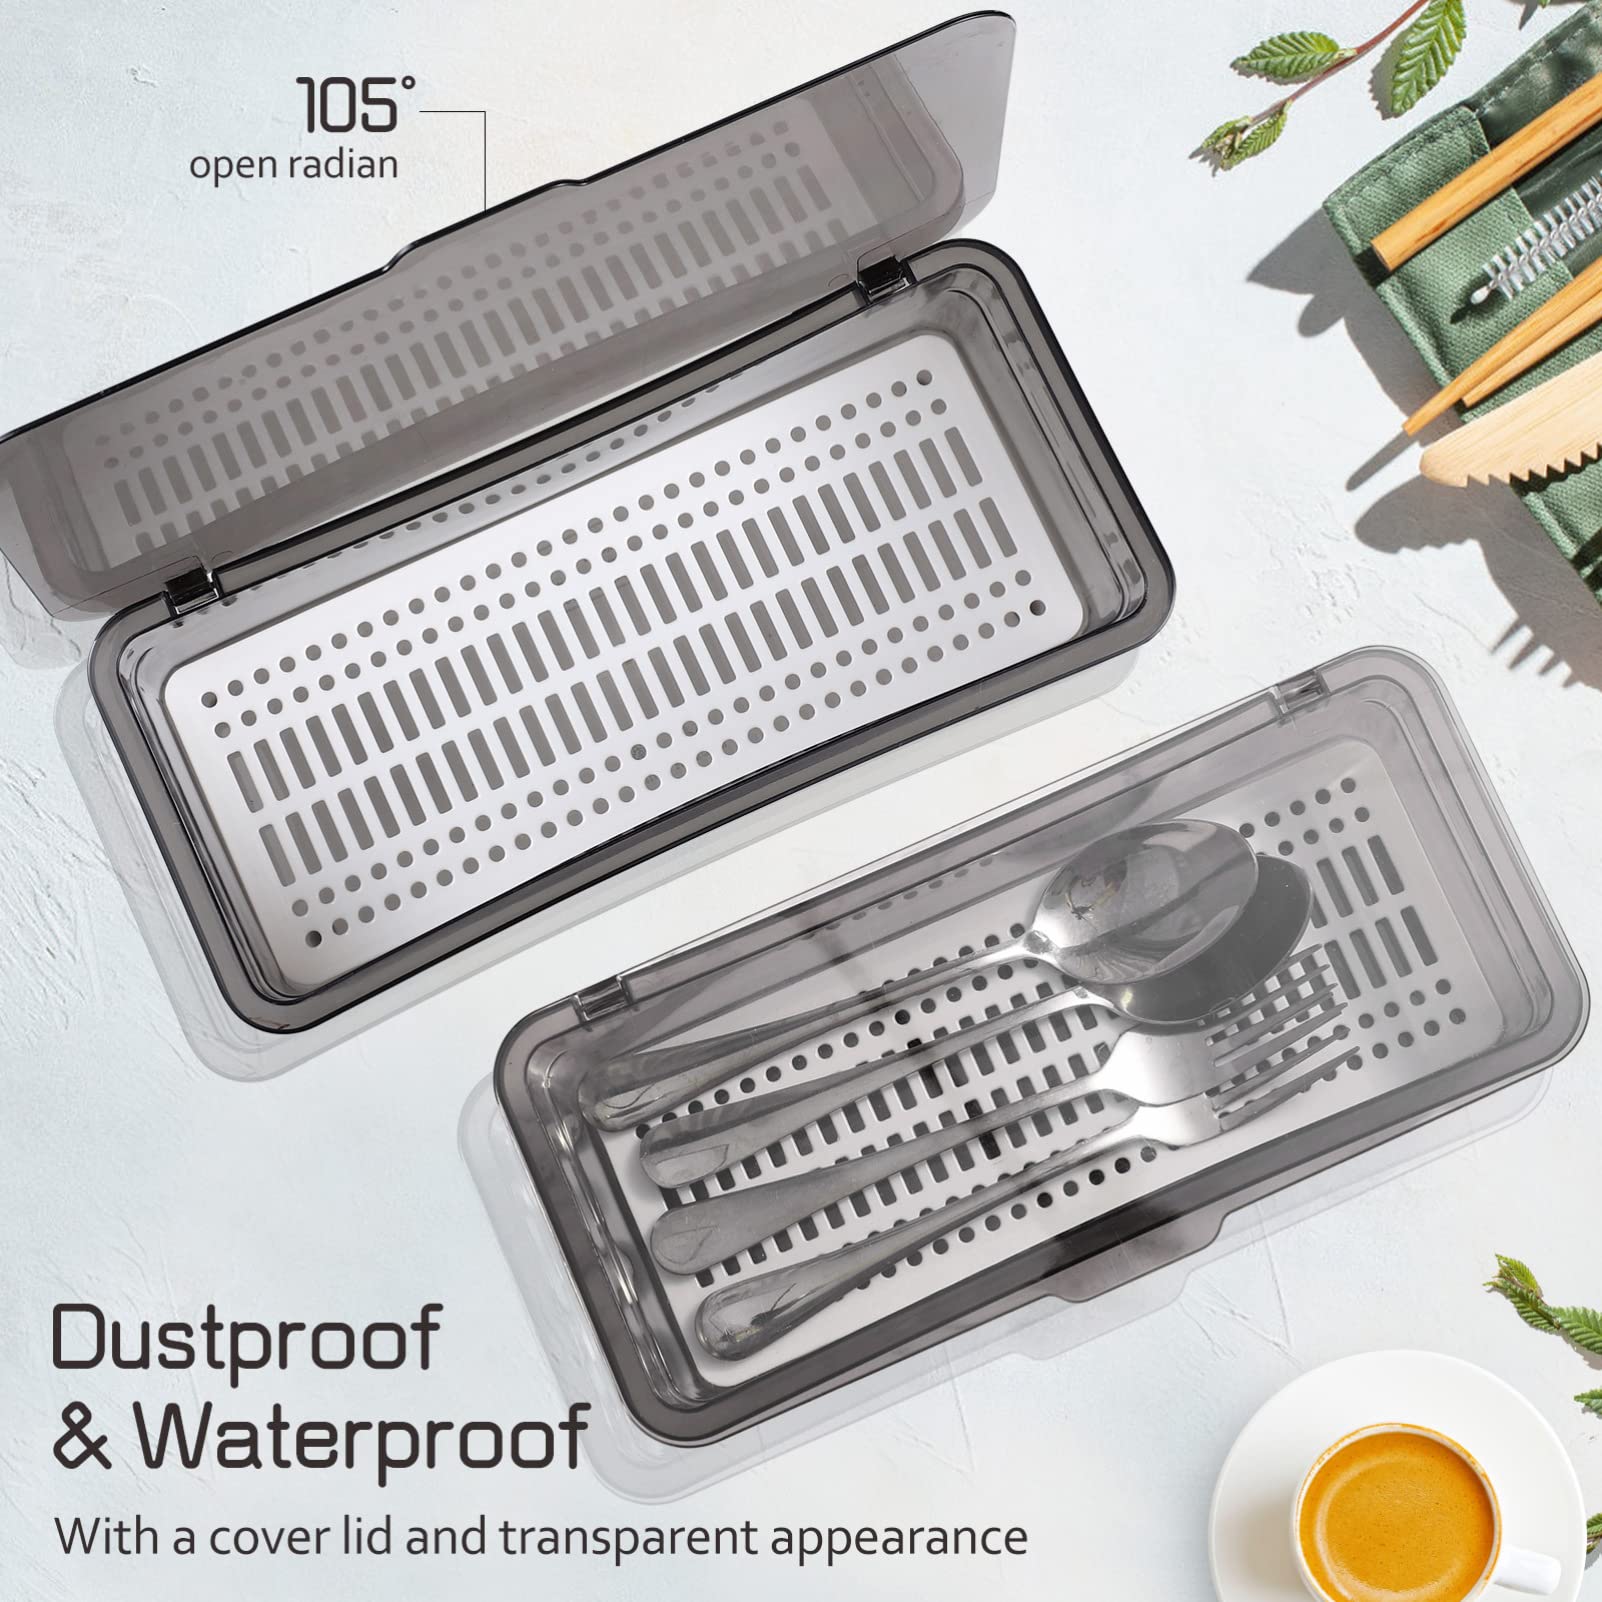 DOITOOL 3PCS Flatware Tray with Lid and Drainer, Tableware Utensil and Cutlery Drawer Organizer with Lid Covered Silverware Tray to Keeps Your Cutlery Organized and Protected